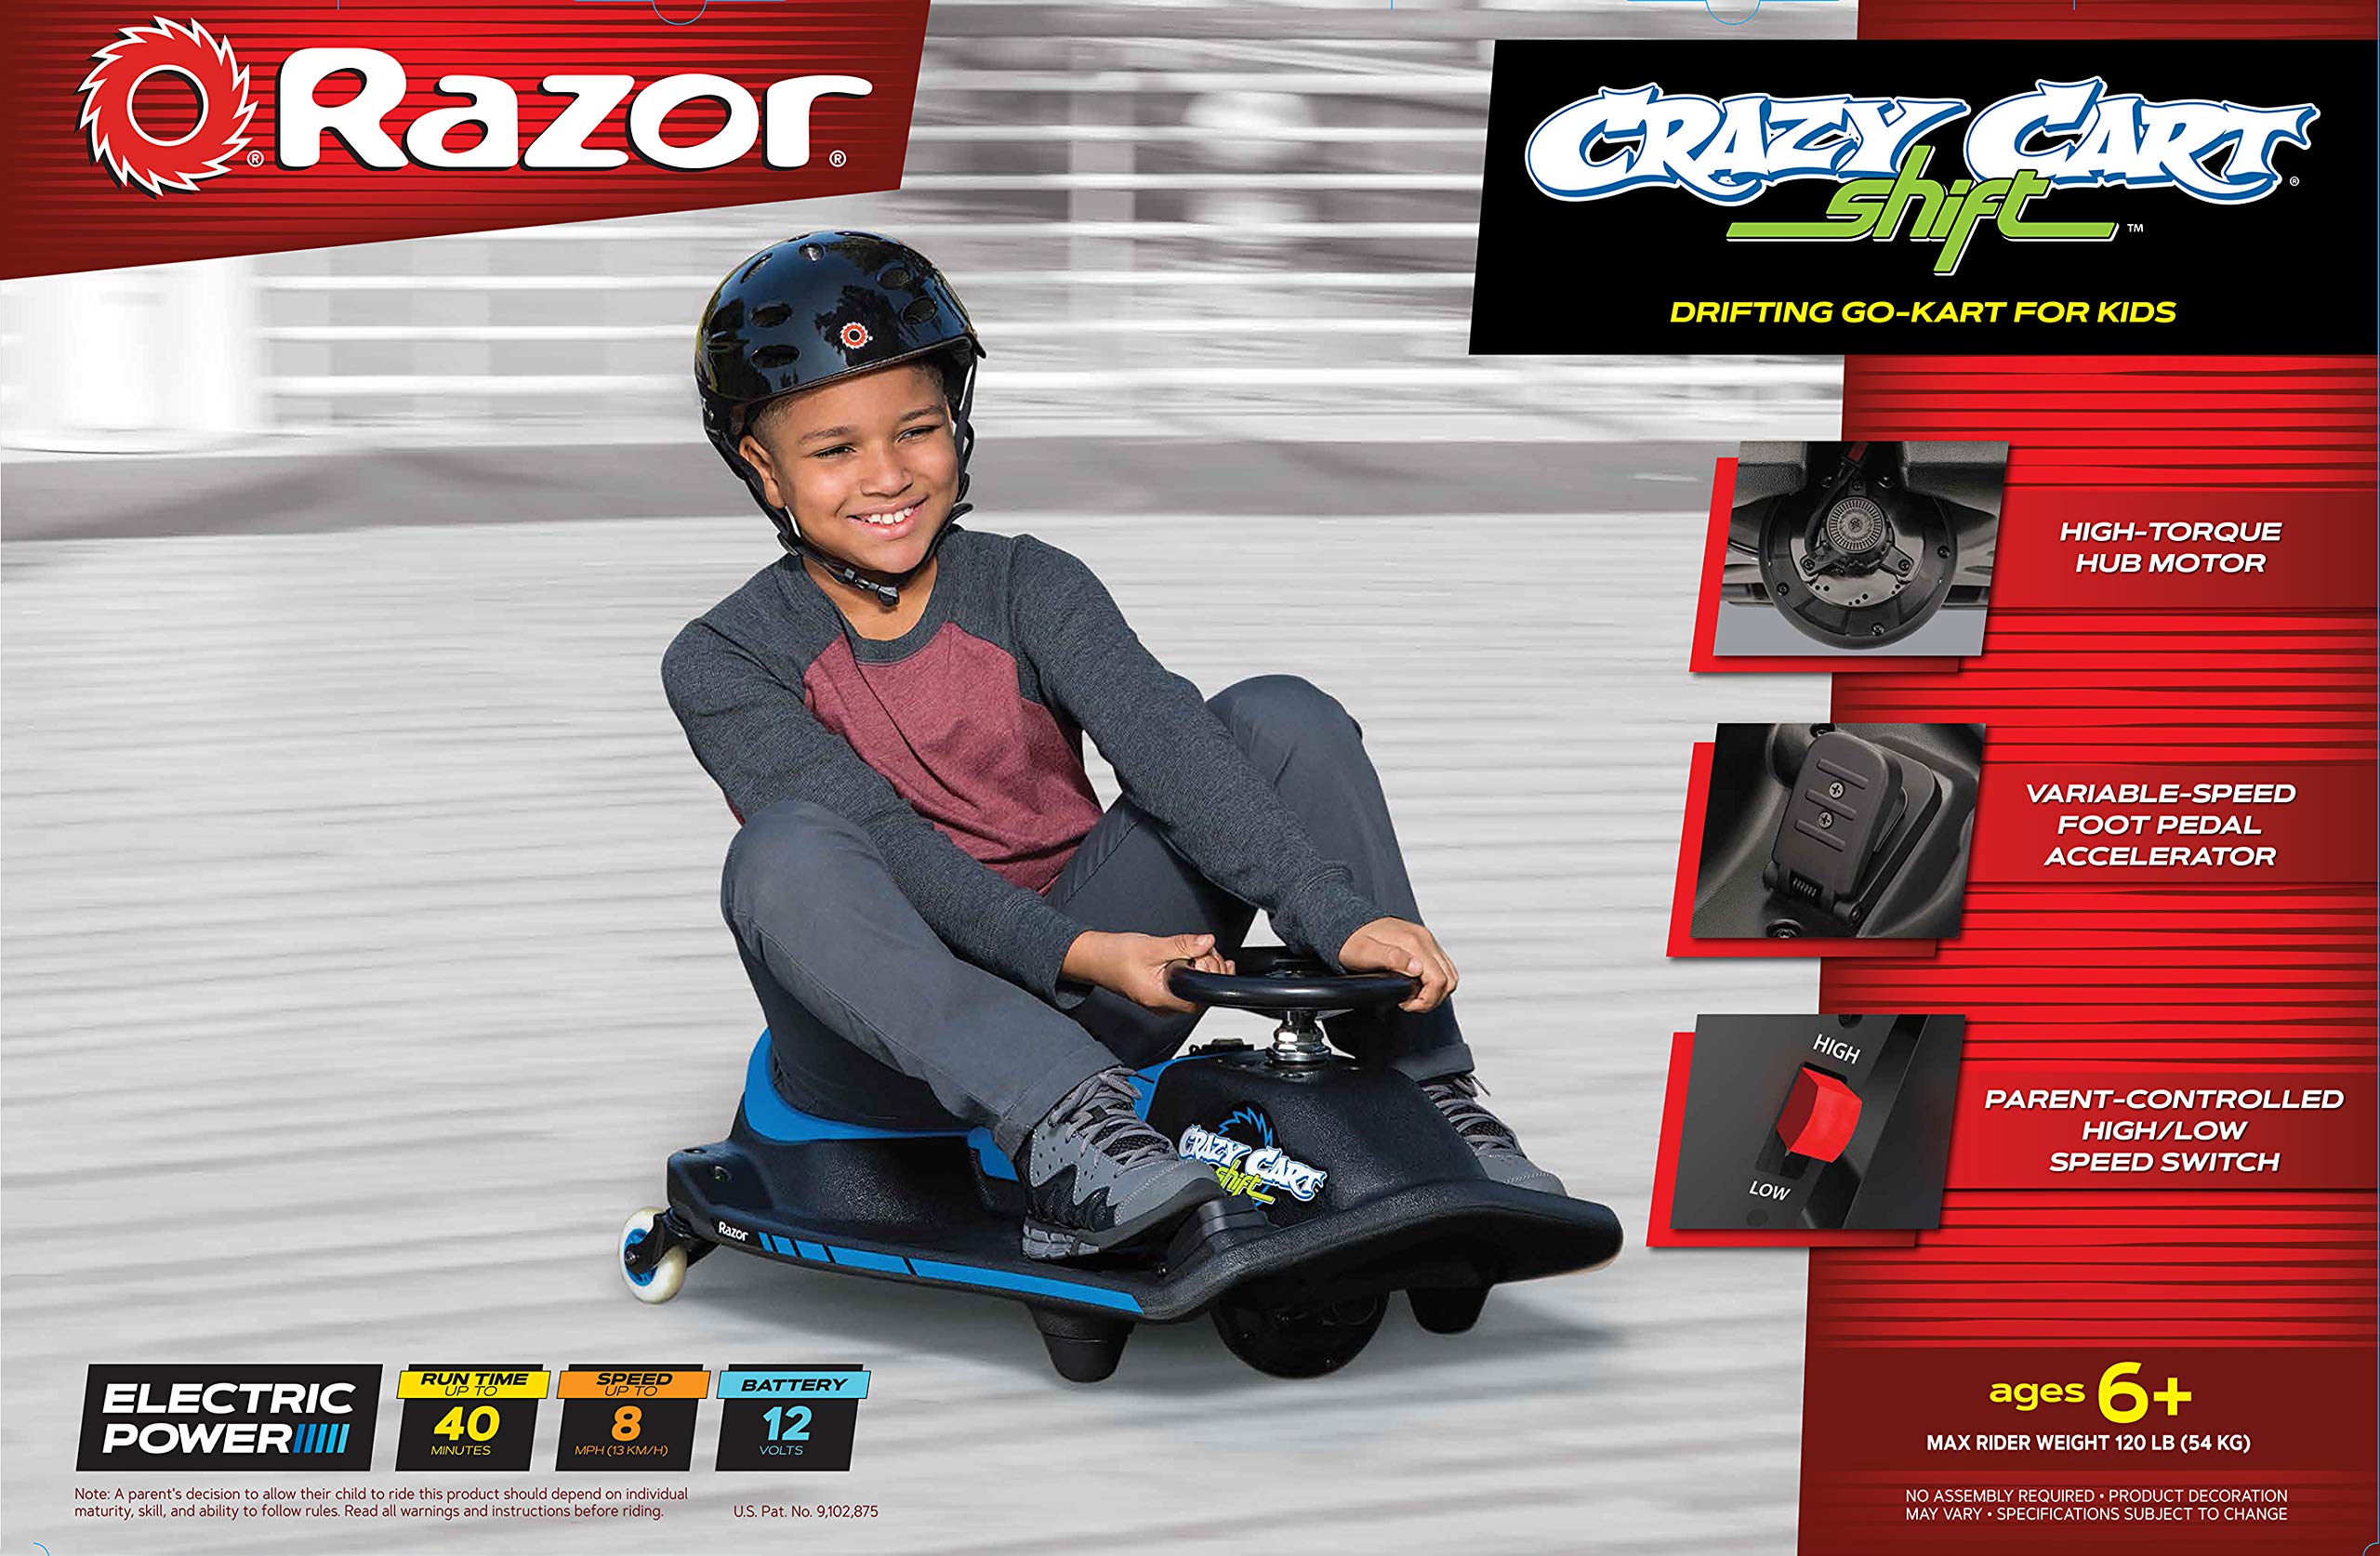 Razor Crazy Cart Shift for Kids Ages 6+ (Low Speed) 8+ (High Speed) - 12V Electric Drifting Go Kart for Kids - High/Low Speed Switch and Simplified Drifting System, for Riders up to 120 lbs,Black/Blue